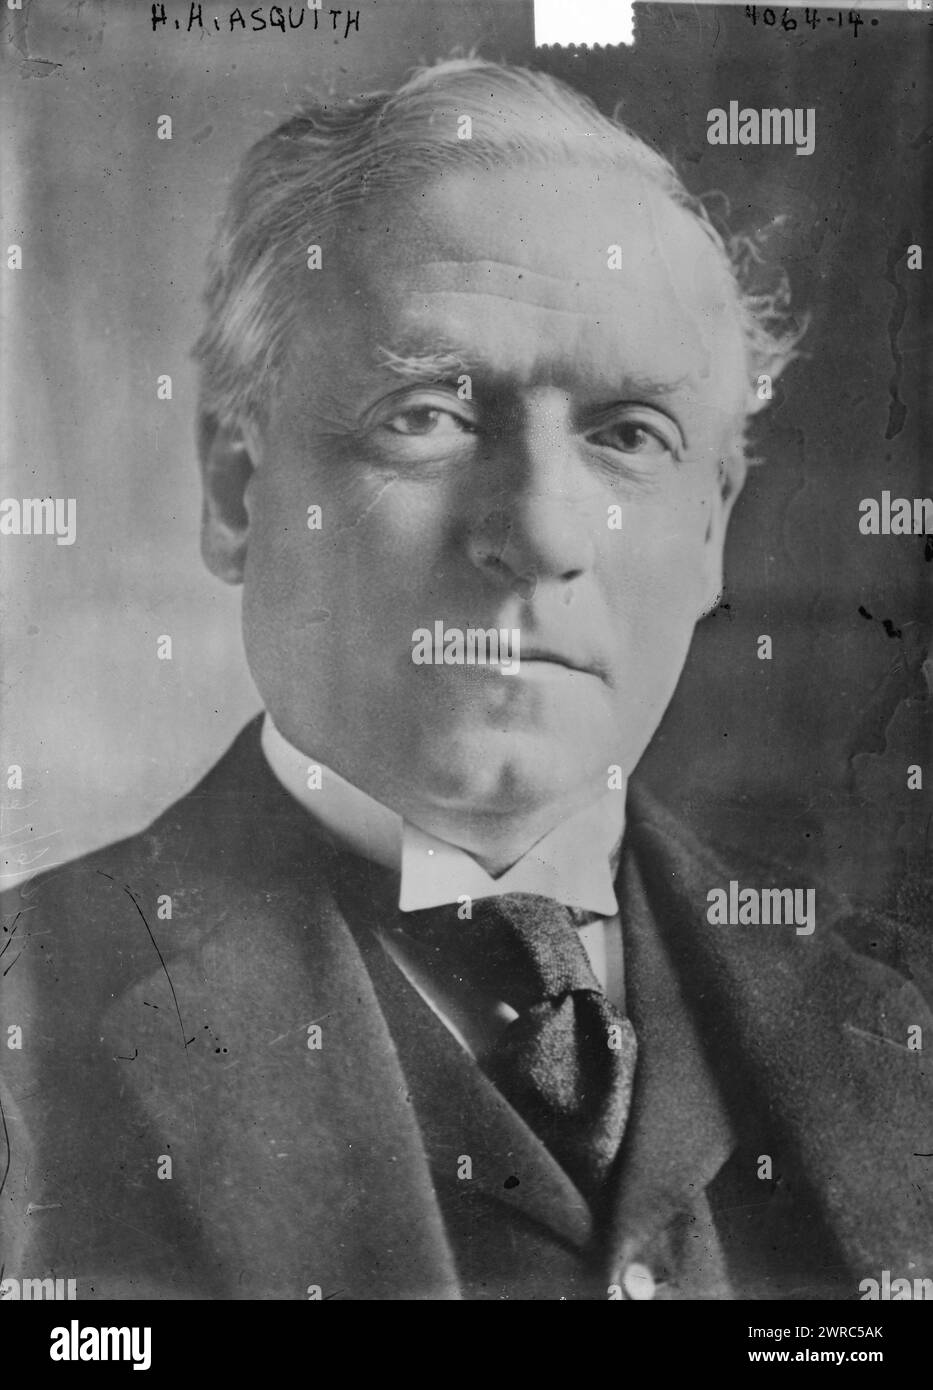 H.H. Asquith, Photograph shows Herbert Henry Asquith, 1st Earl of Oxford and Asquith (1852-1928), who was the British Prime Minister (1908-1916)., between ca. 1915 and ca. 1920, Glass negatives, 1 negative: glass Stock Photo